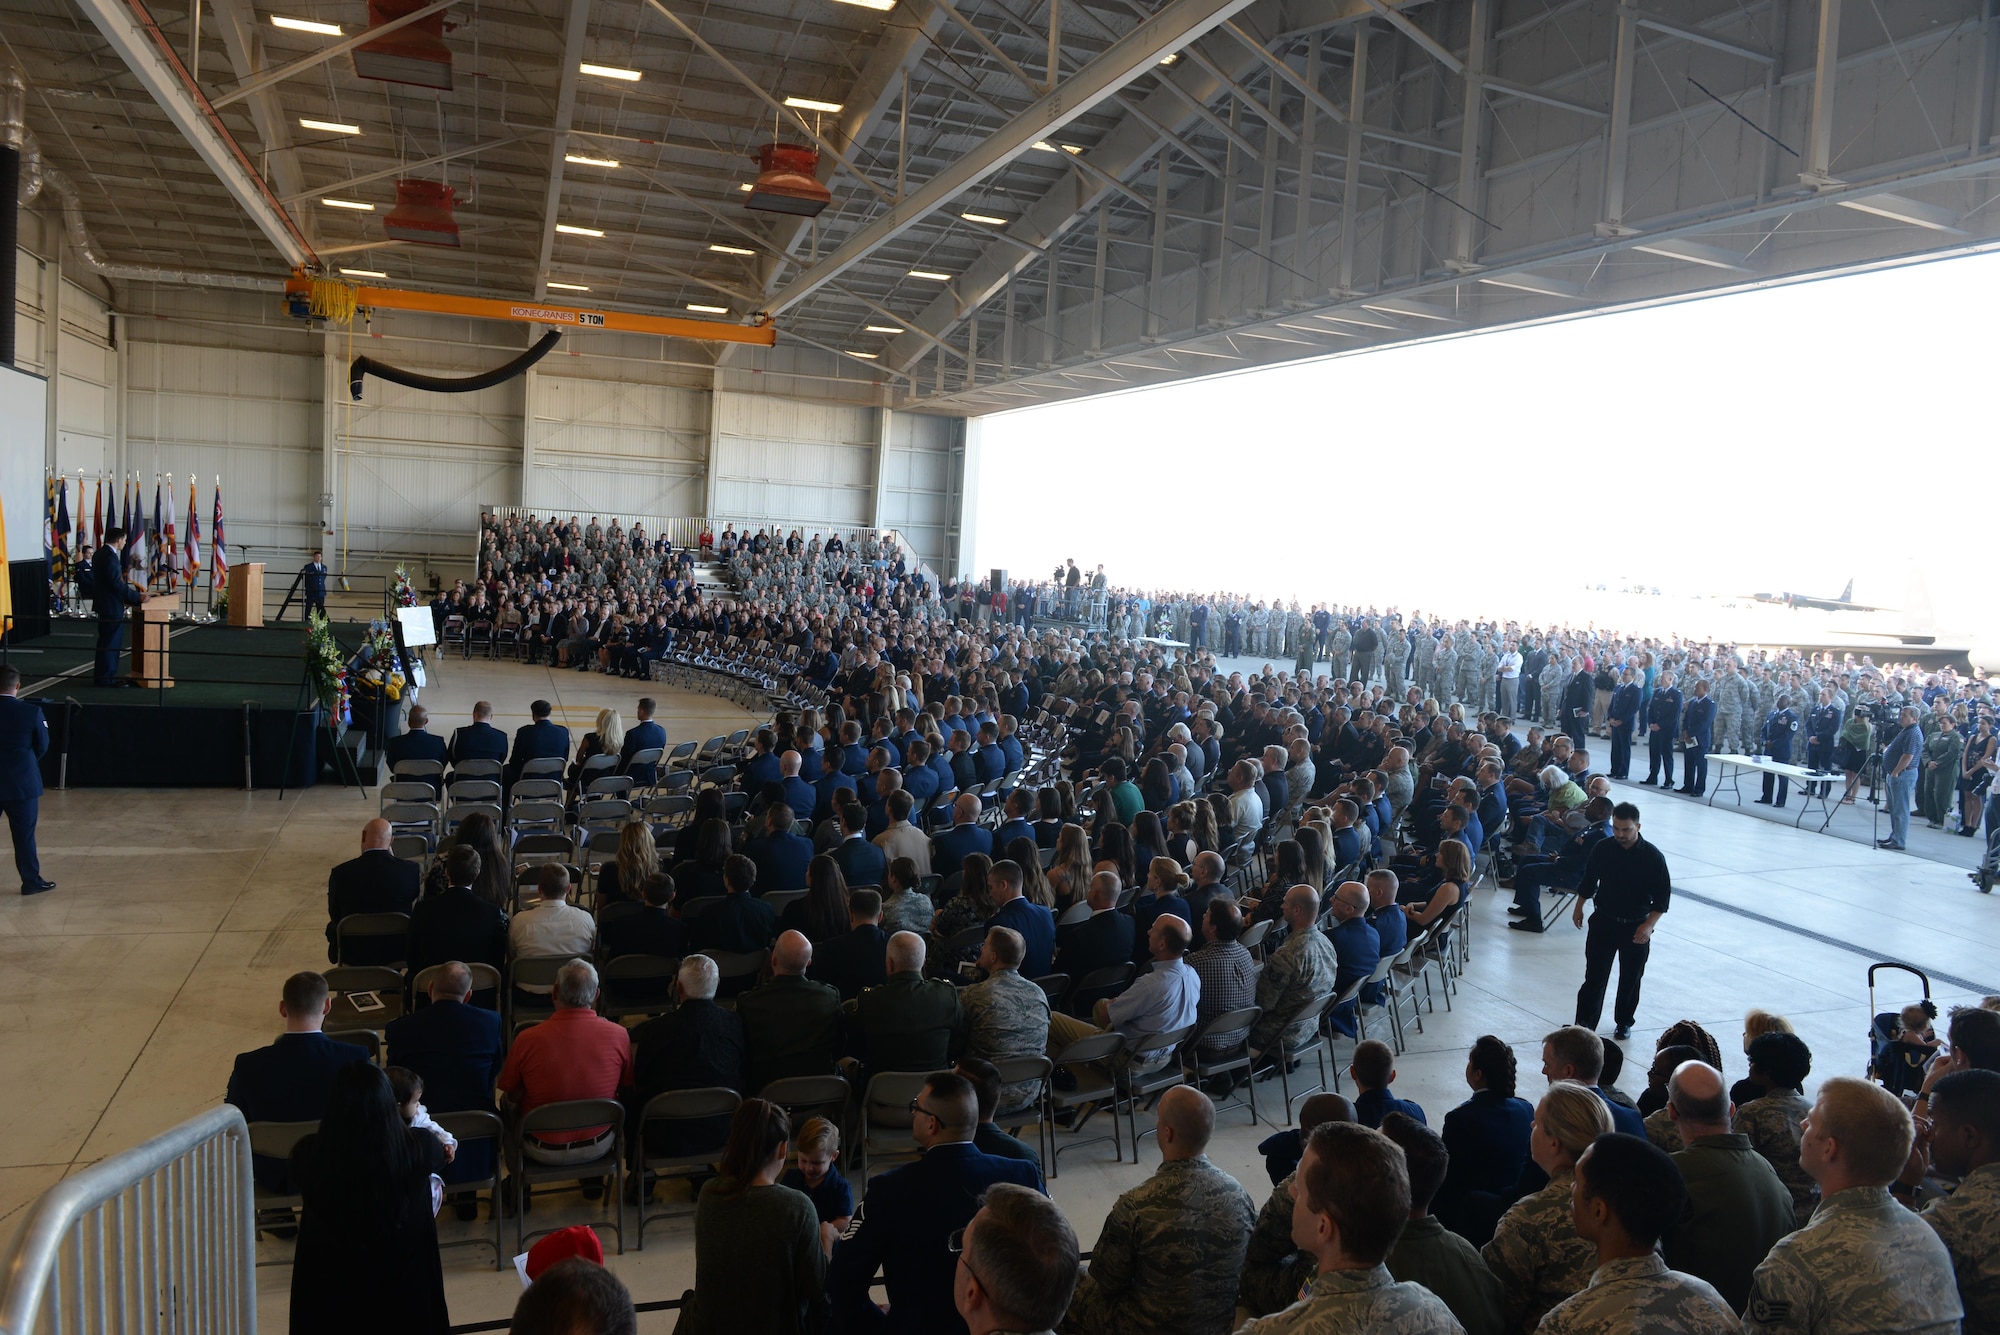 Hundreds of attendees gather for a memorial service for Lt. Col. Steve “Shooter” Eadie, Sept. 29, 2016, at Beale Air Force Base, California. Eadie was assigned to the 1st Reconnaissance Squadron and served as a U-2 instructor pilot. He is survived by his wife Ashley, and their six children. (U.S. Air Force photo/Staff Sgt. Bobby Cummings)